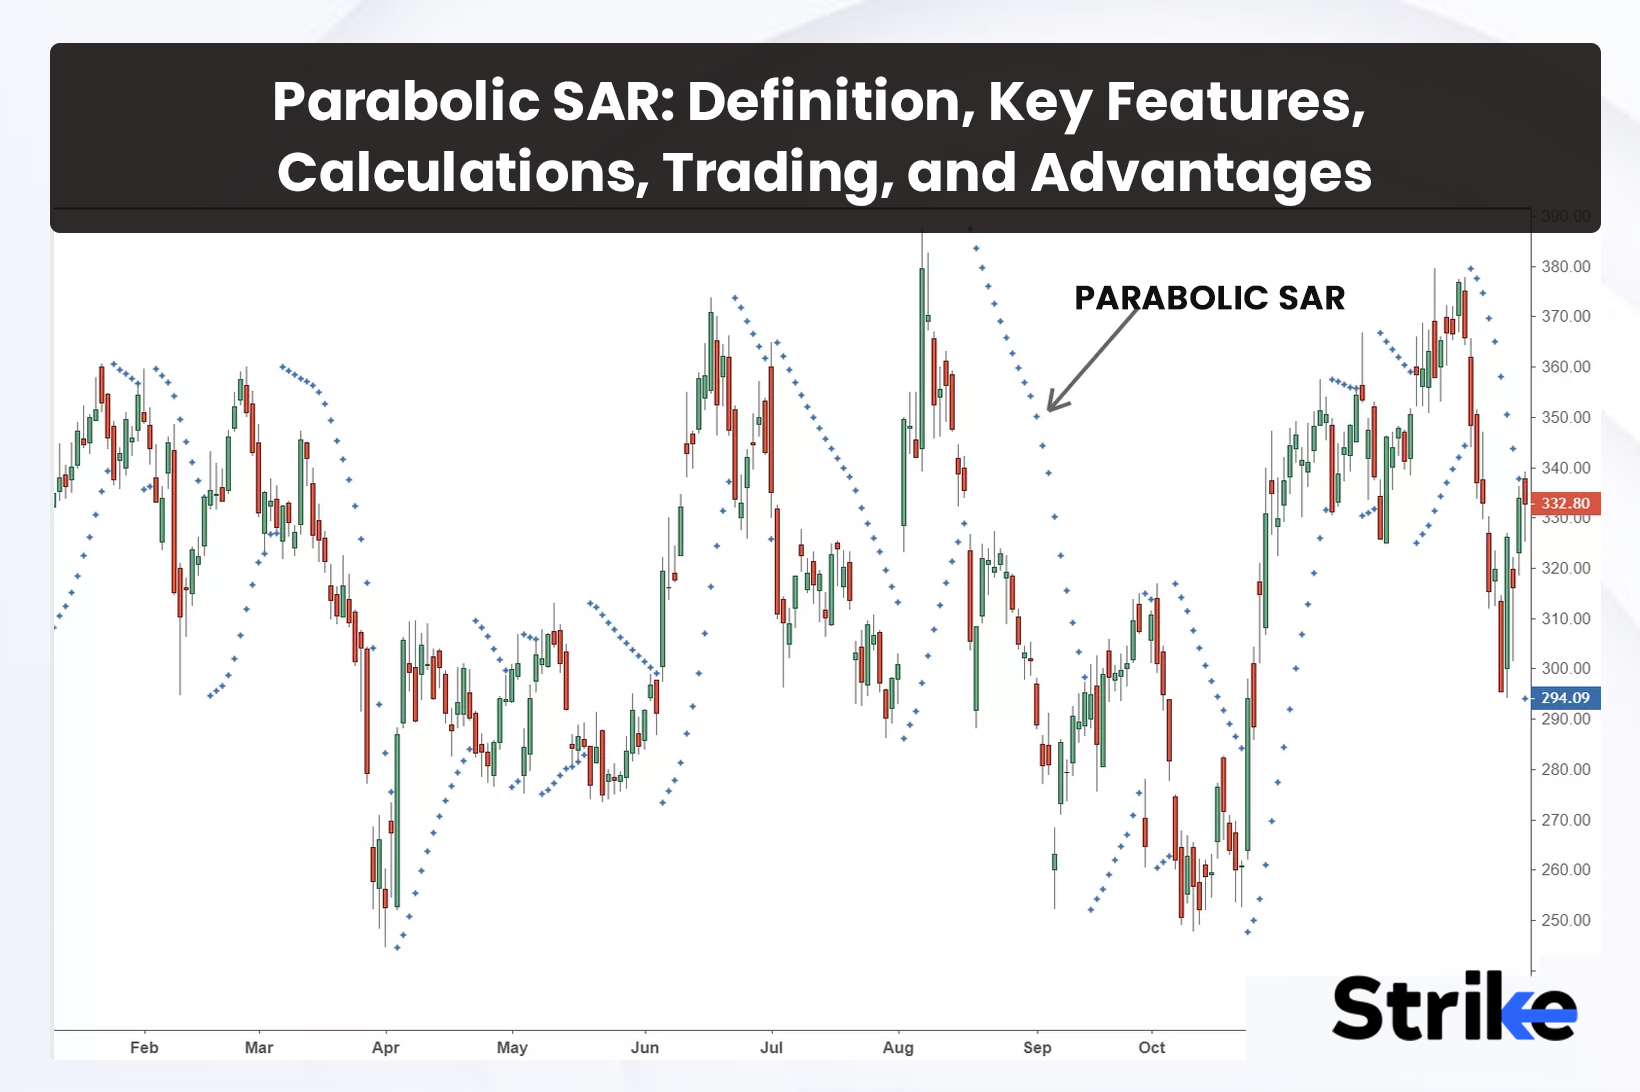 Parabolic SAR: Definition, Key Features, Calculations, Trading, and Advantages